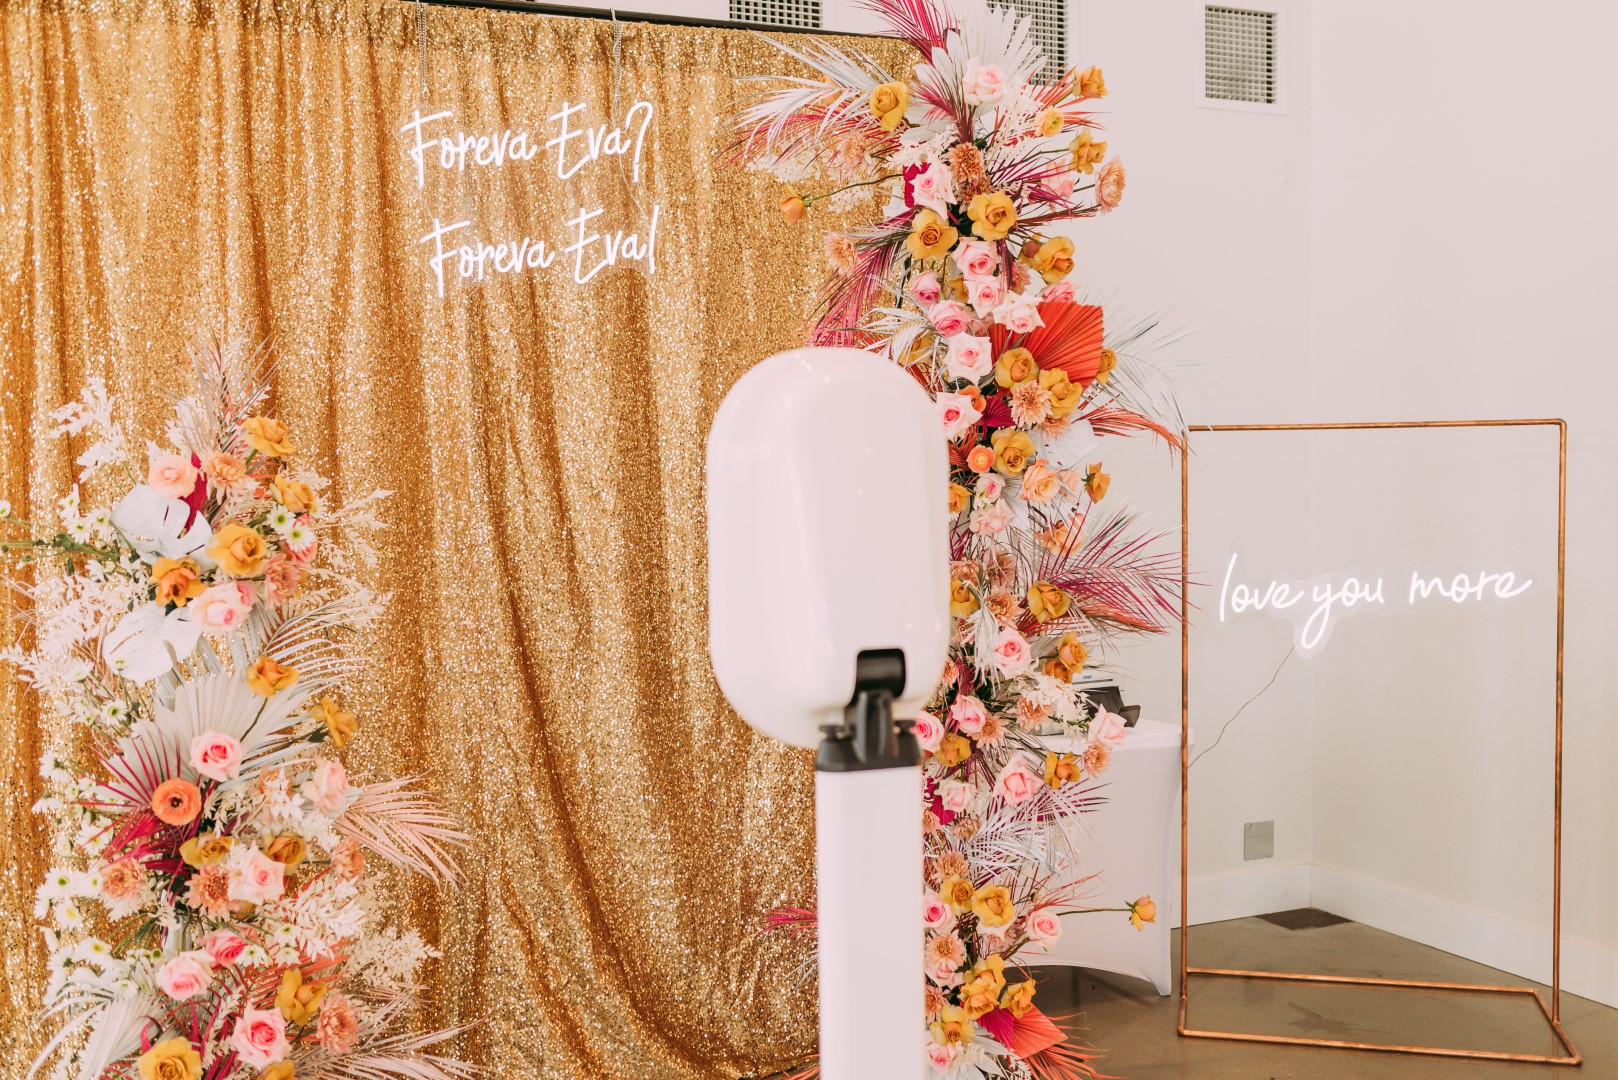 NWA Photo Booth is placed in front of a shimmery gold sequin backdrop and surrounded by bright prink and orange flowers at Osage House in Northwest Arkansas. To the right of NWA Photo Booth there is a neon sign in white light that reads I love you more, hanging from a copper pipe stand.